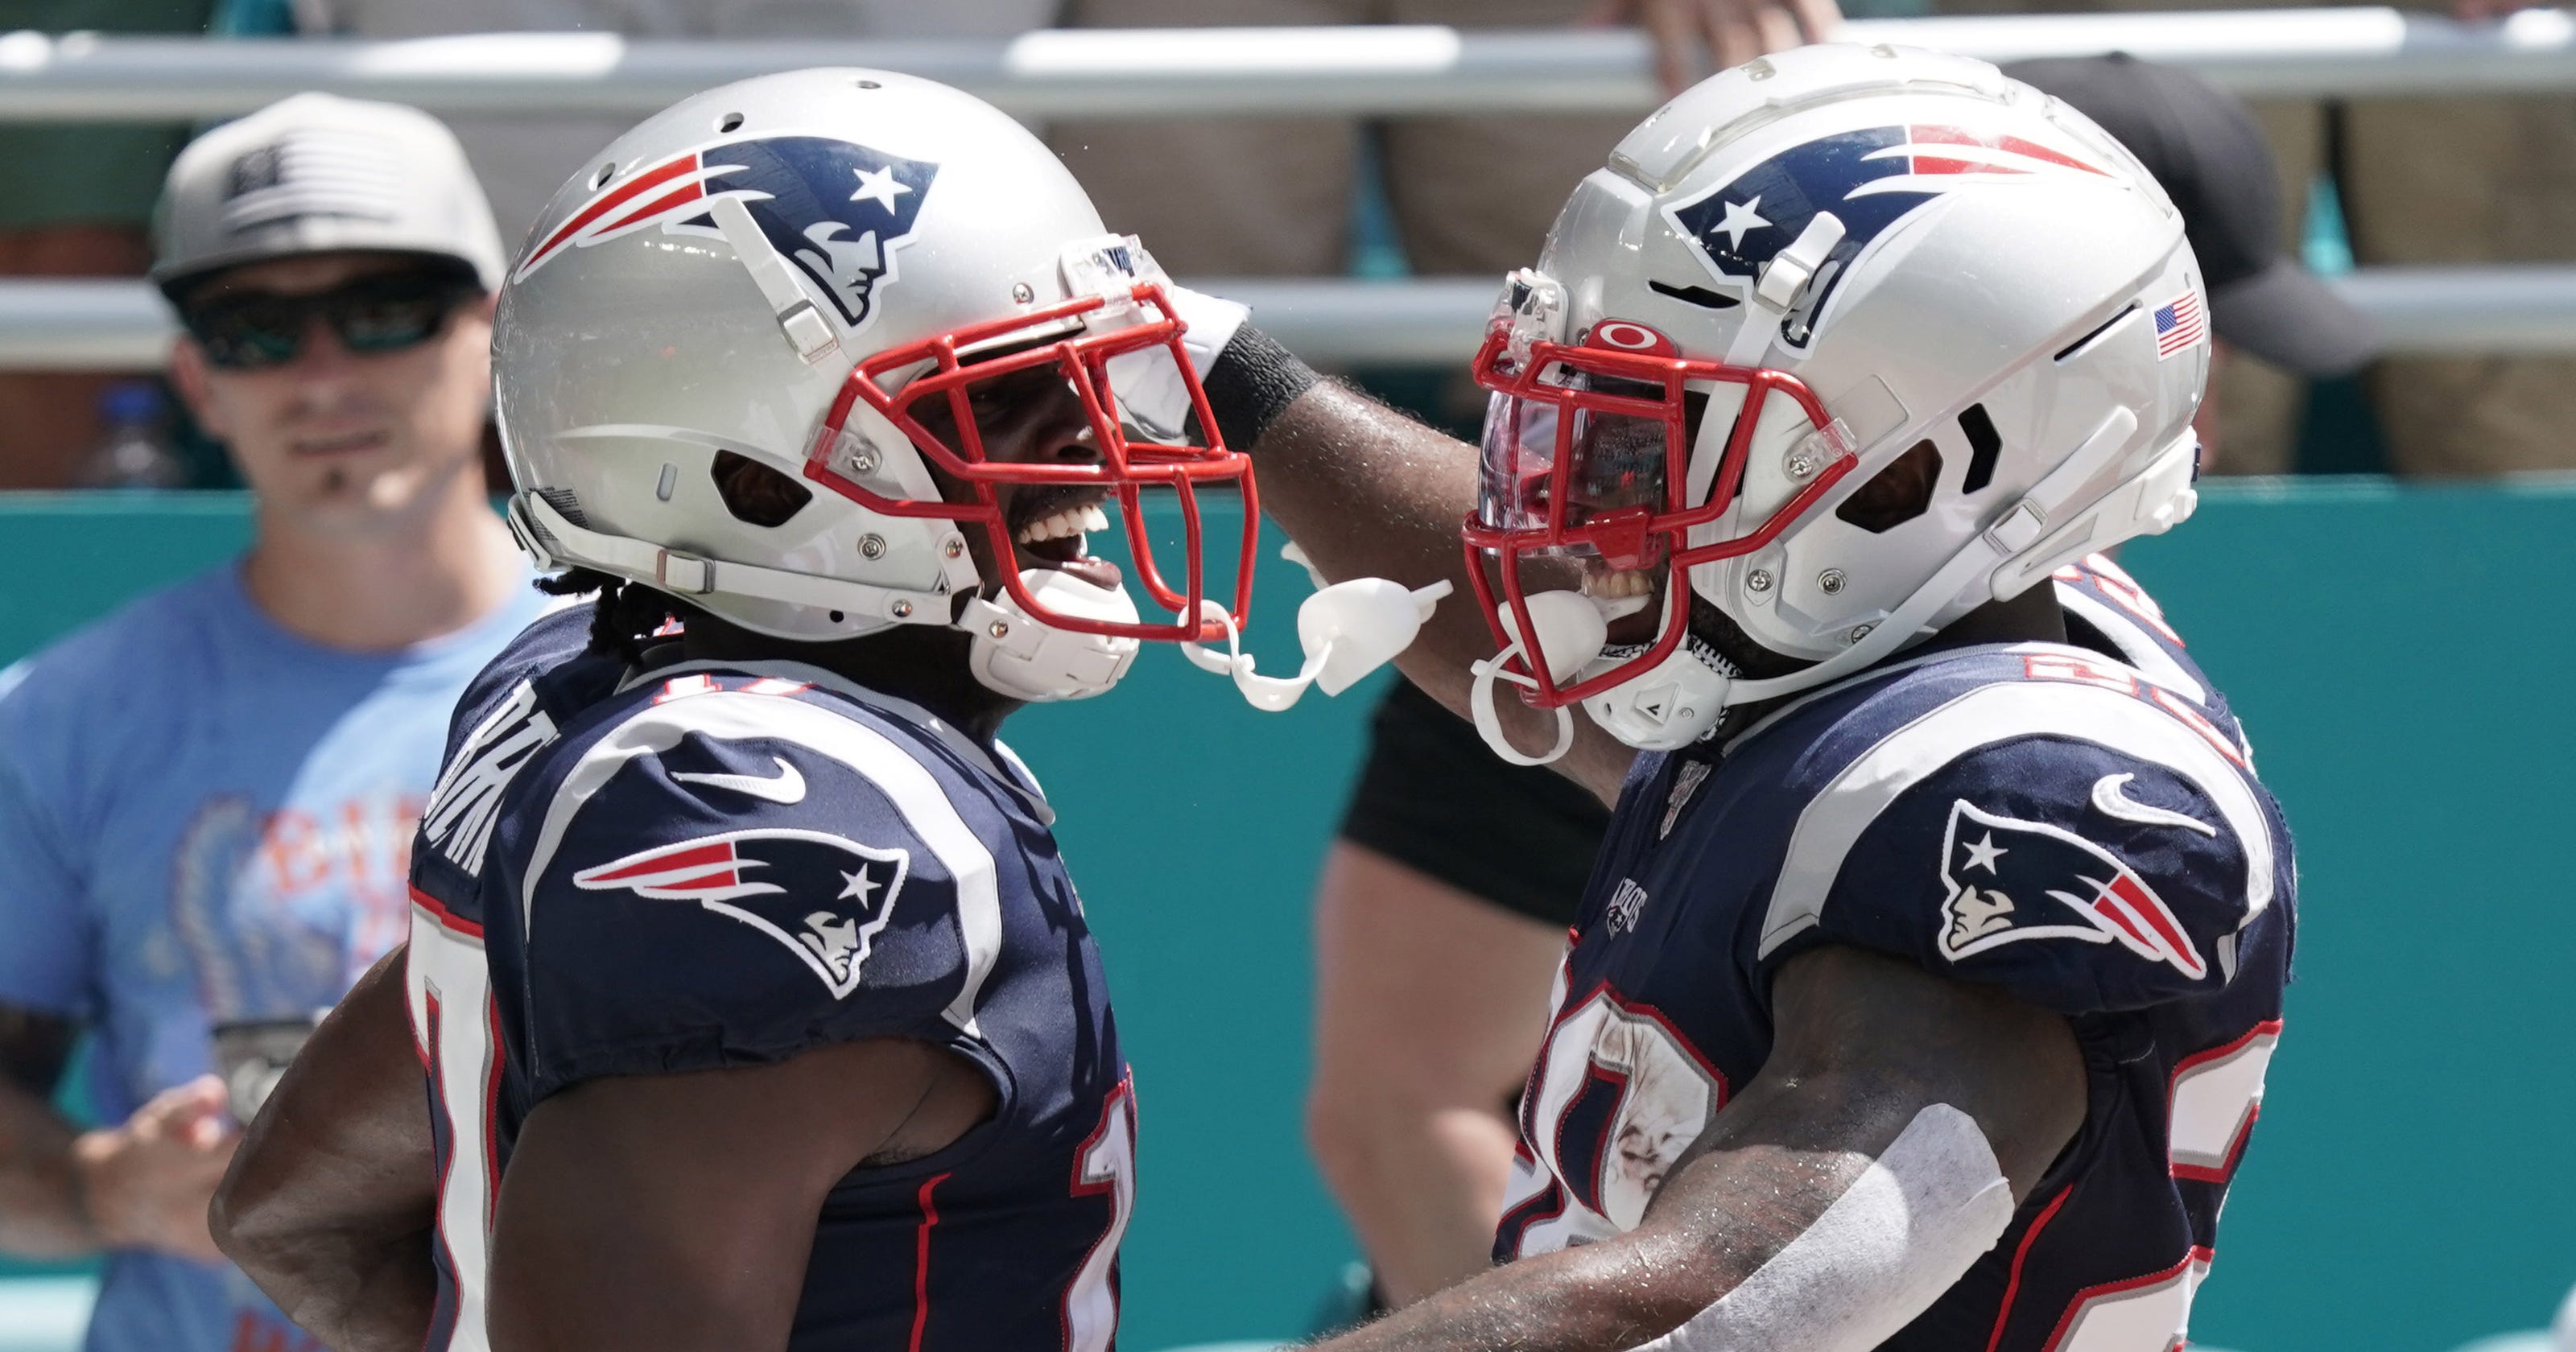 NFL: Antonio Brown's role in debut reveals Patriots' shamelessness